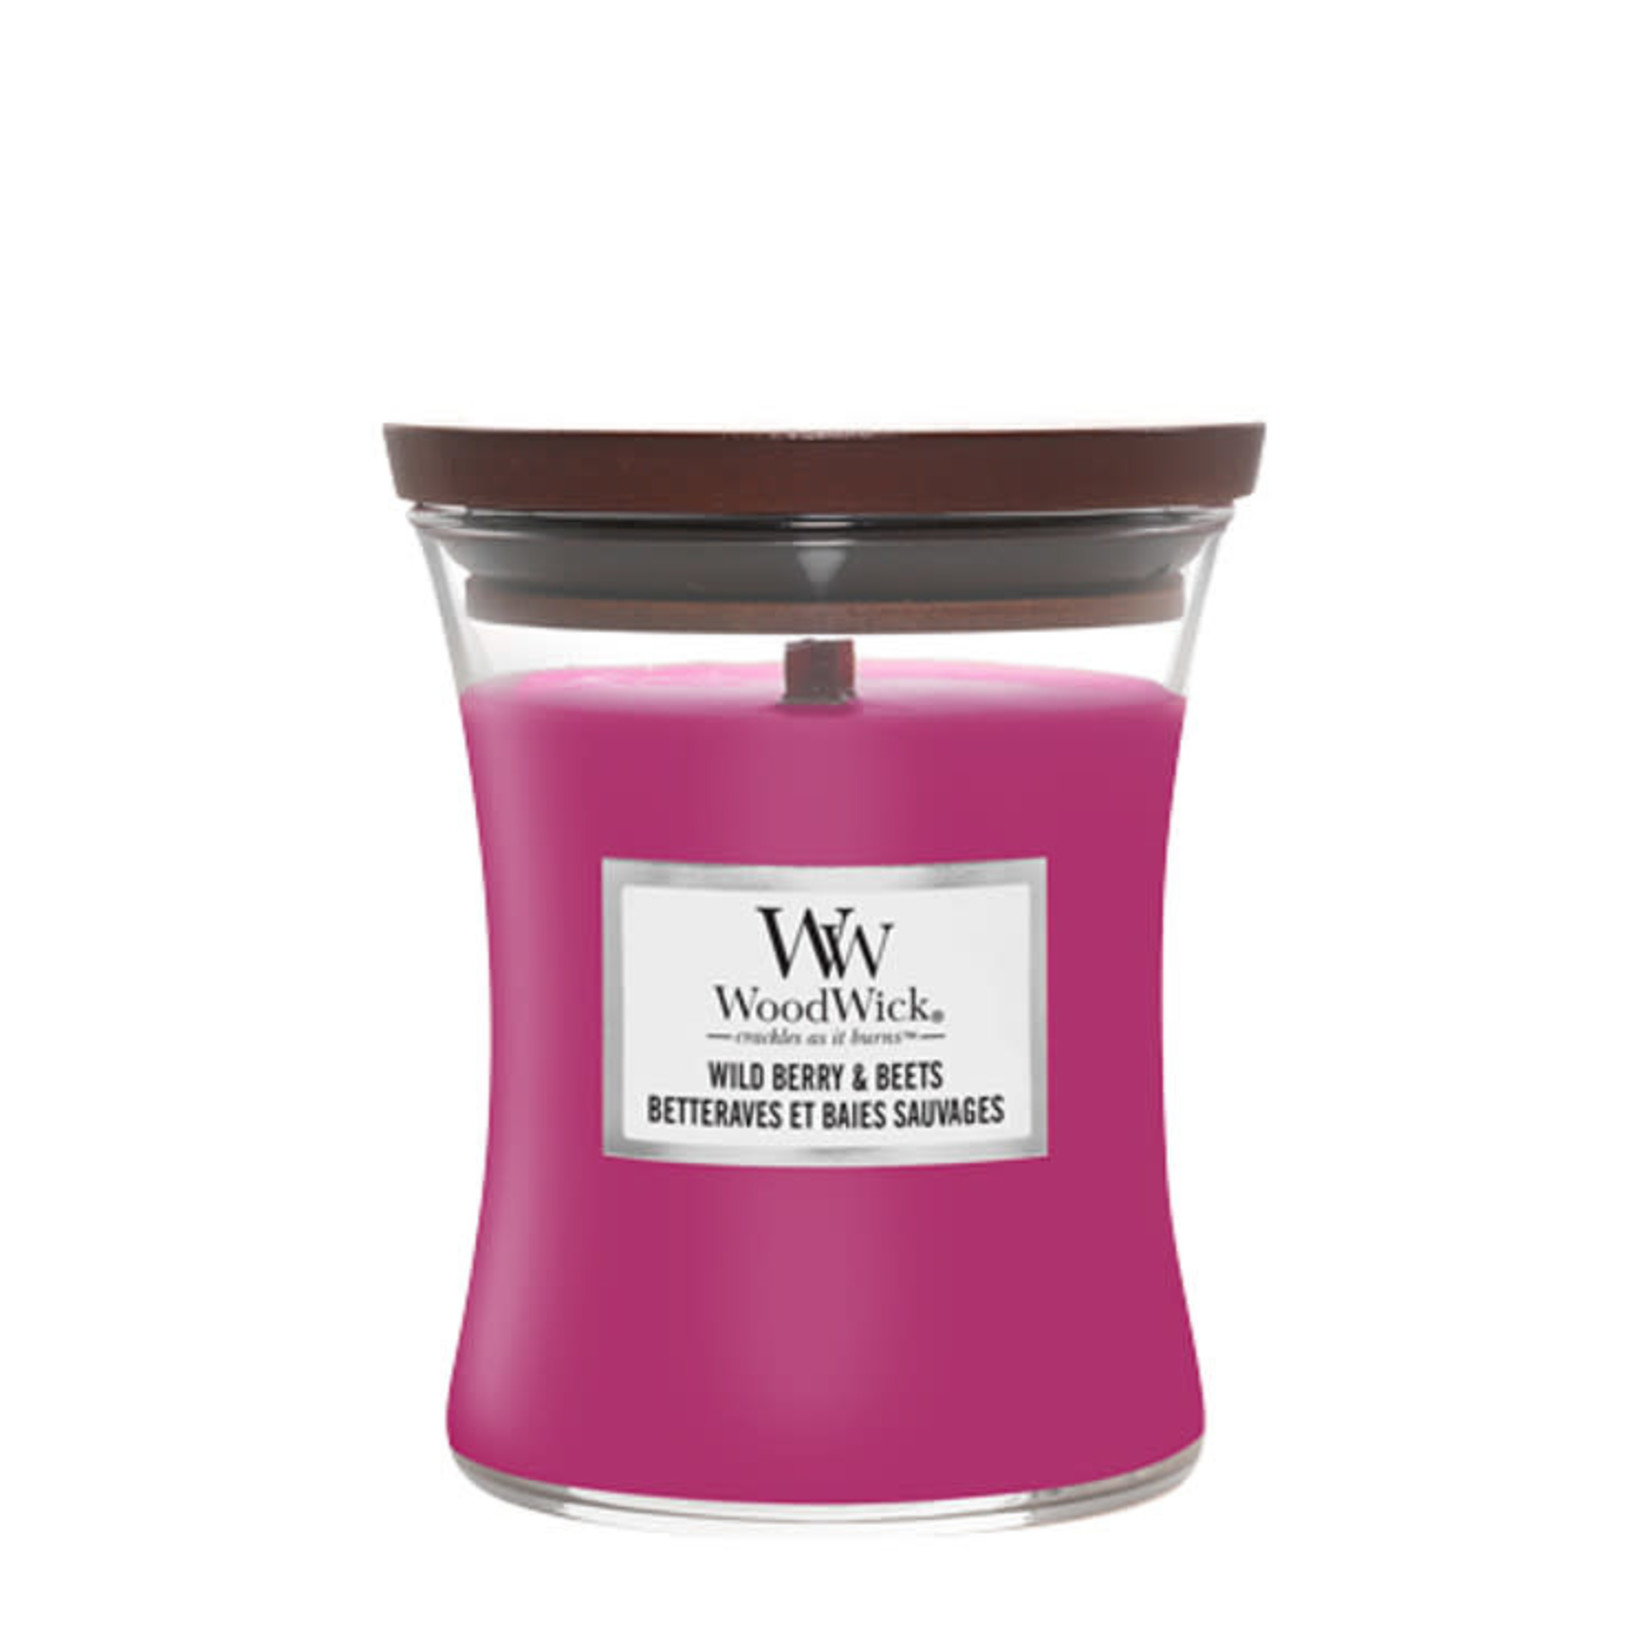 Woodwick woodwick betteraves et baies sauvages Medium